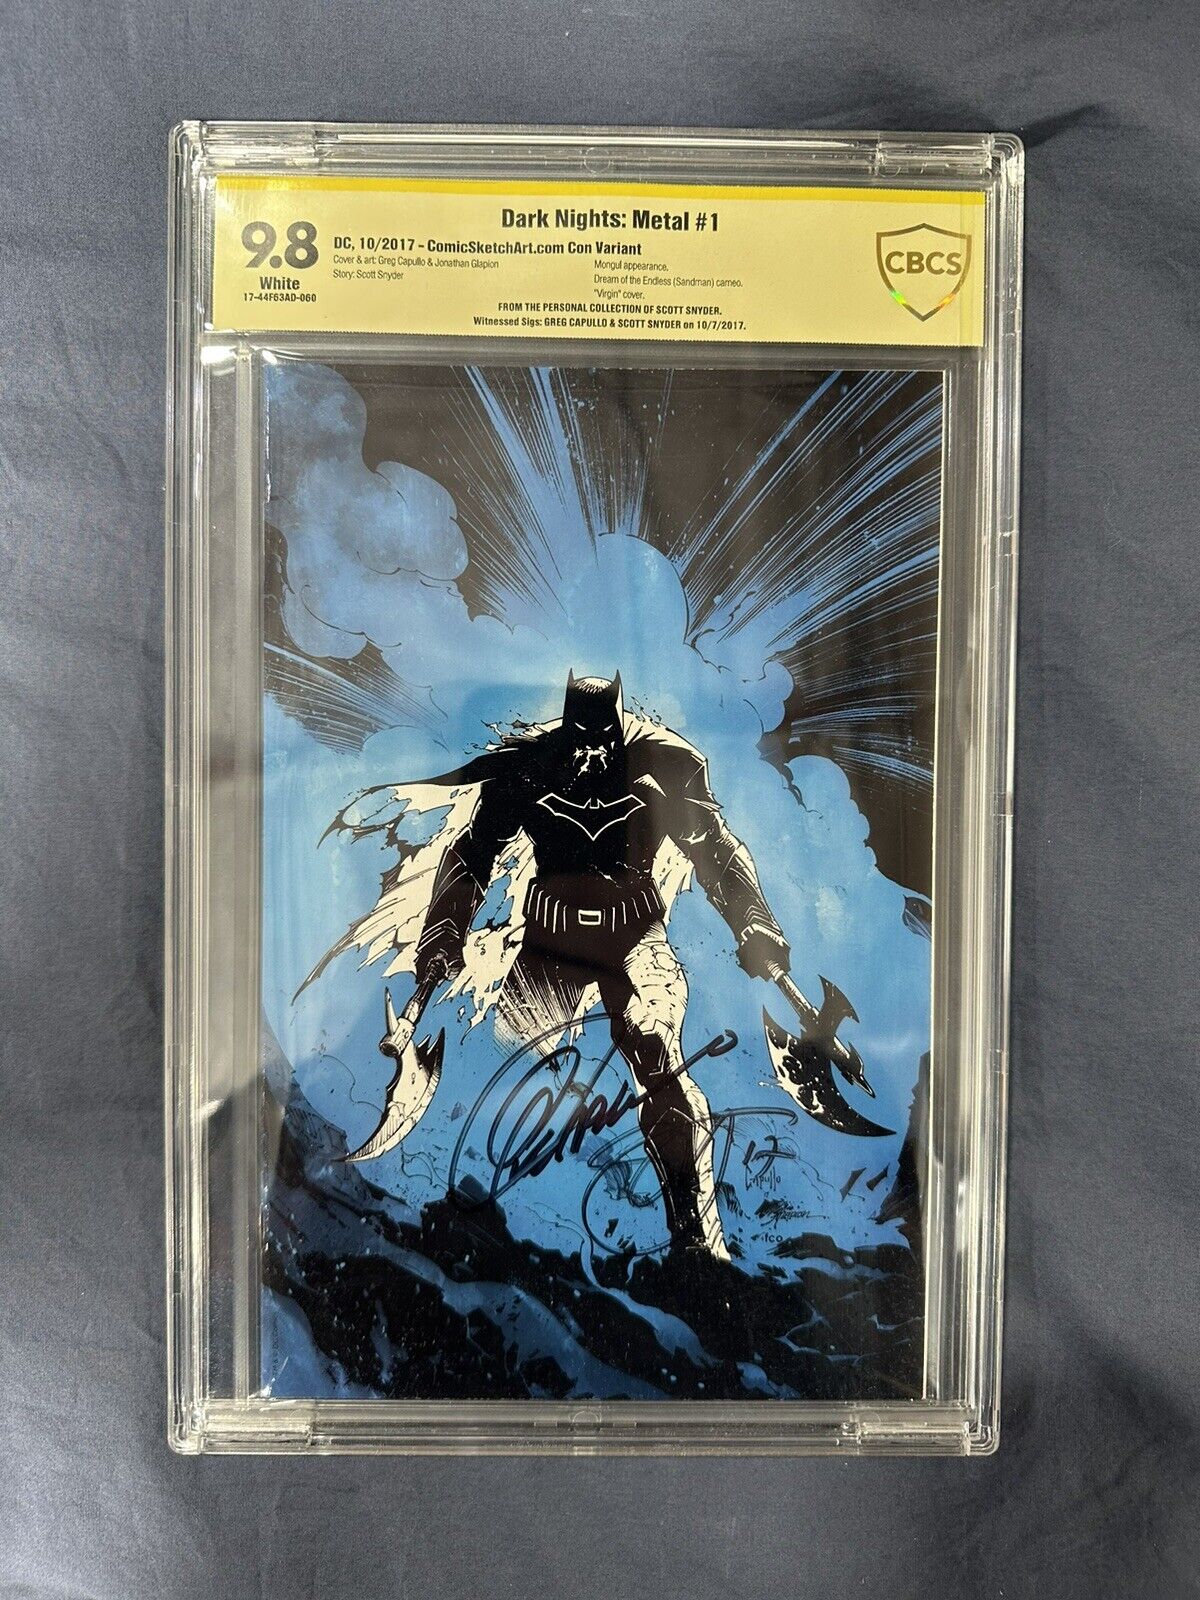 Dark Nights Metal 1 cbcs 9.8 2X Signed From Snyder Personal Collection Not CGC